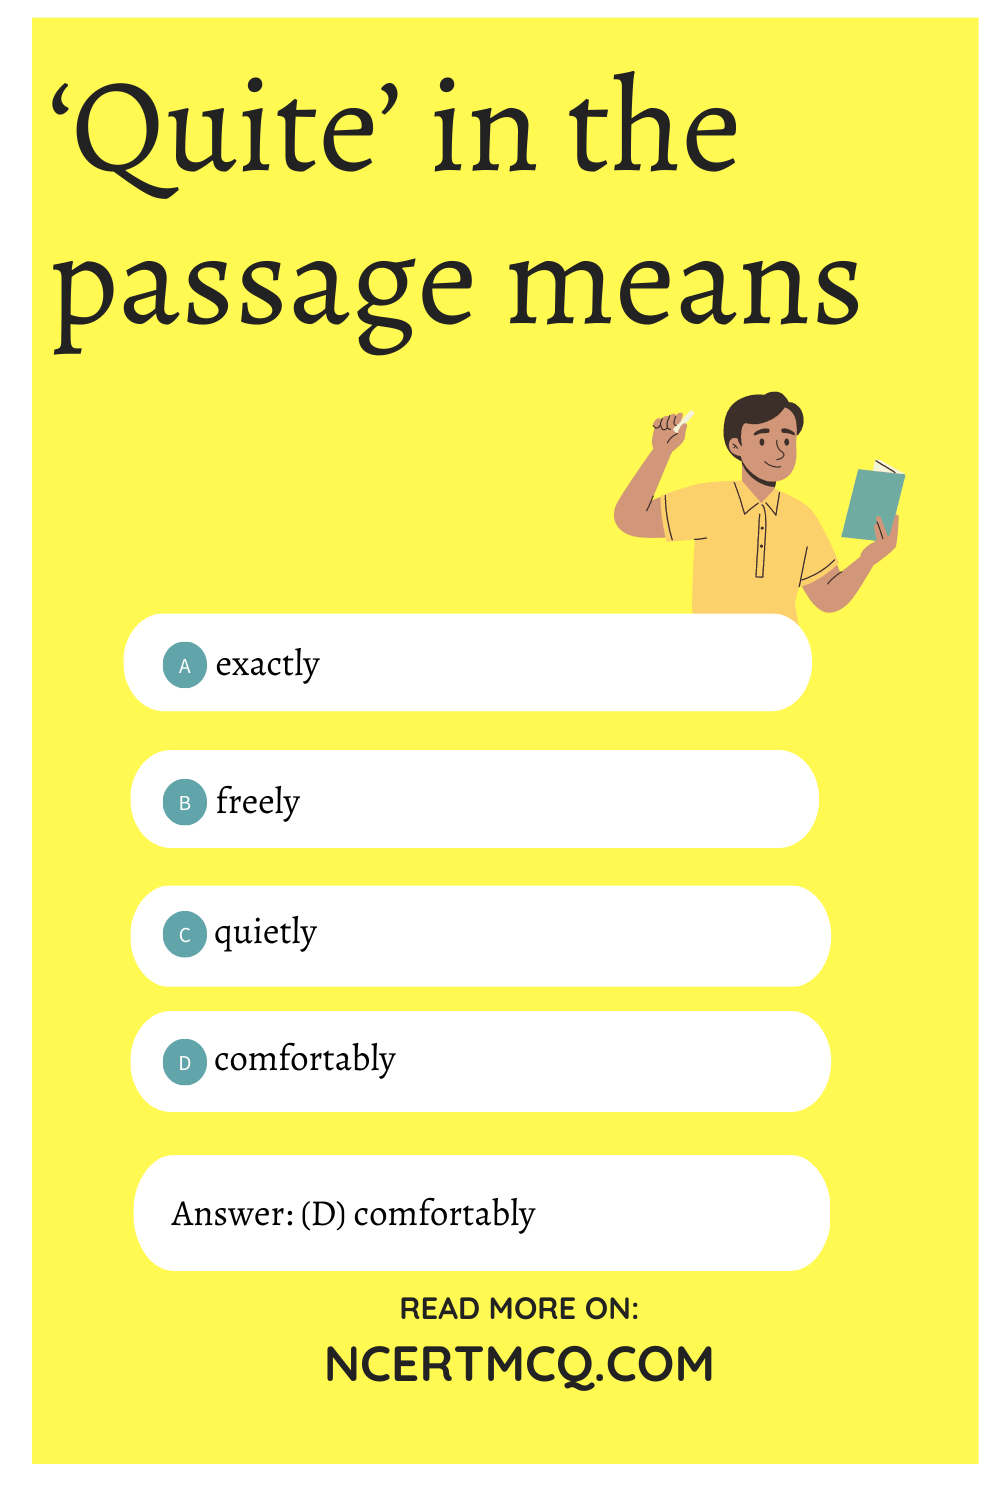 ‘Quite’ in the passage means